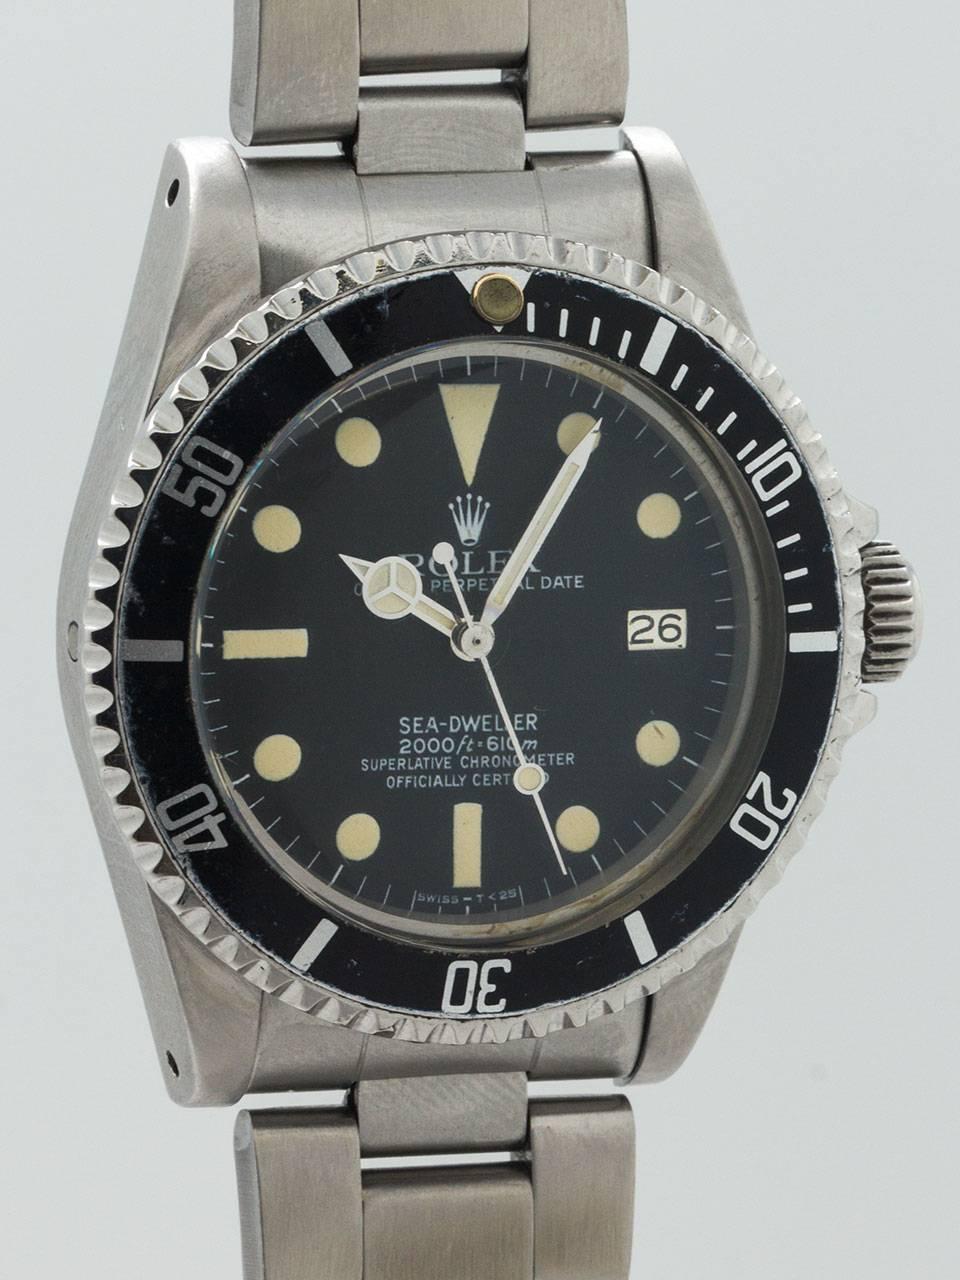 Rolex Stainless Steel “Great White” Seadweller Wristwatch ref 1665 serial number 6.5 million circa 1979 full set with box and papers. From estate, this great looking “Great White” vintage Seadweller is about as complete a set as possible. Original